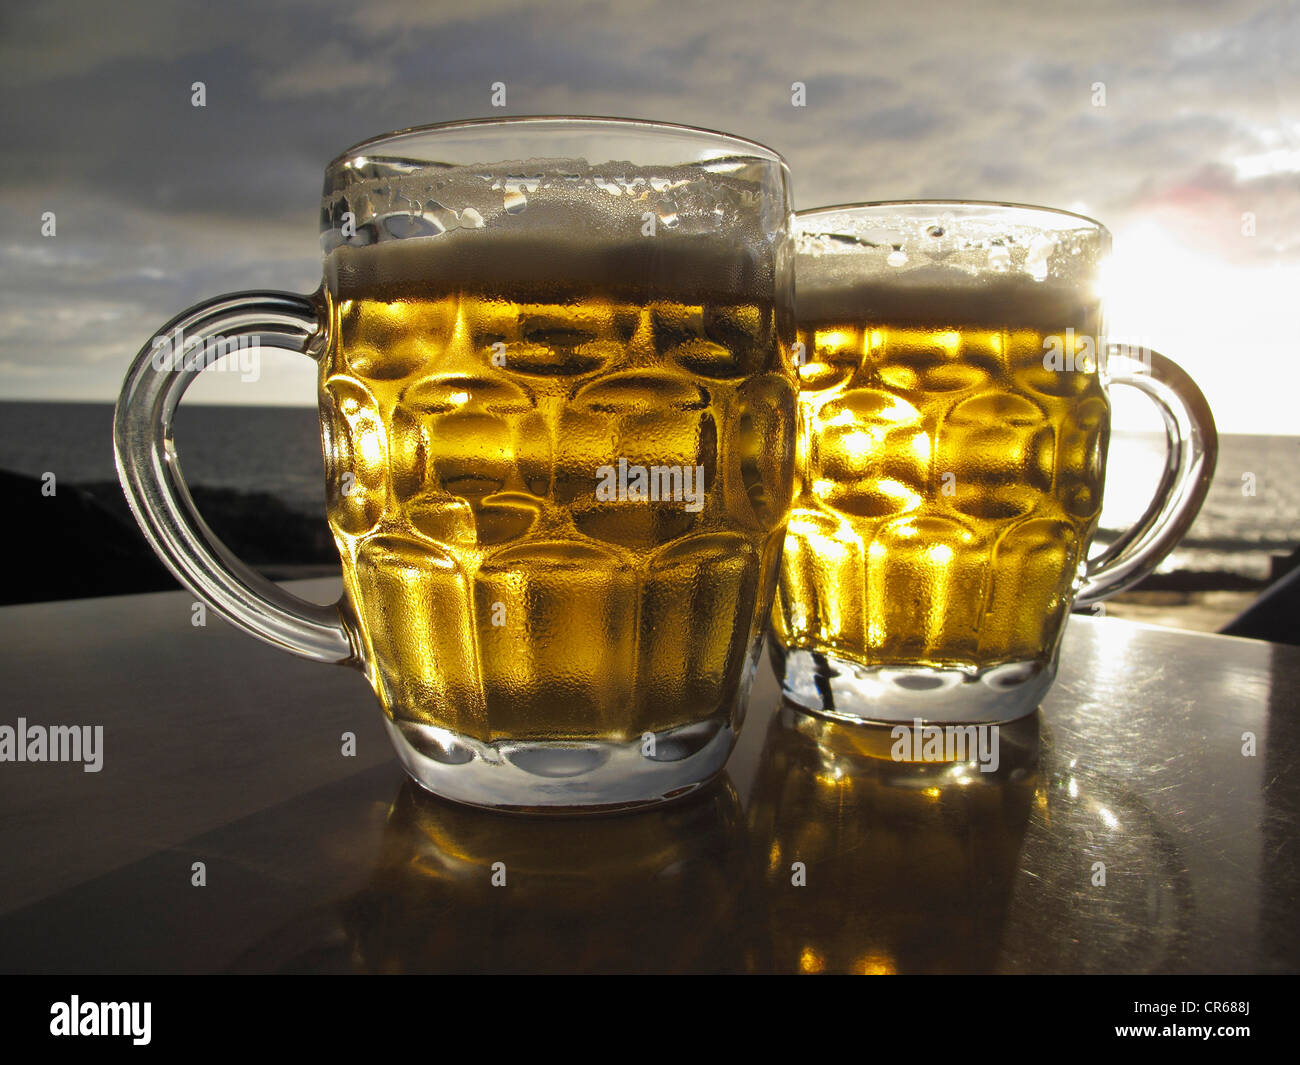 Spain, Two beer glasses on table with sea in background Stock Photo